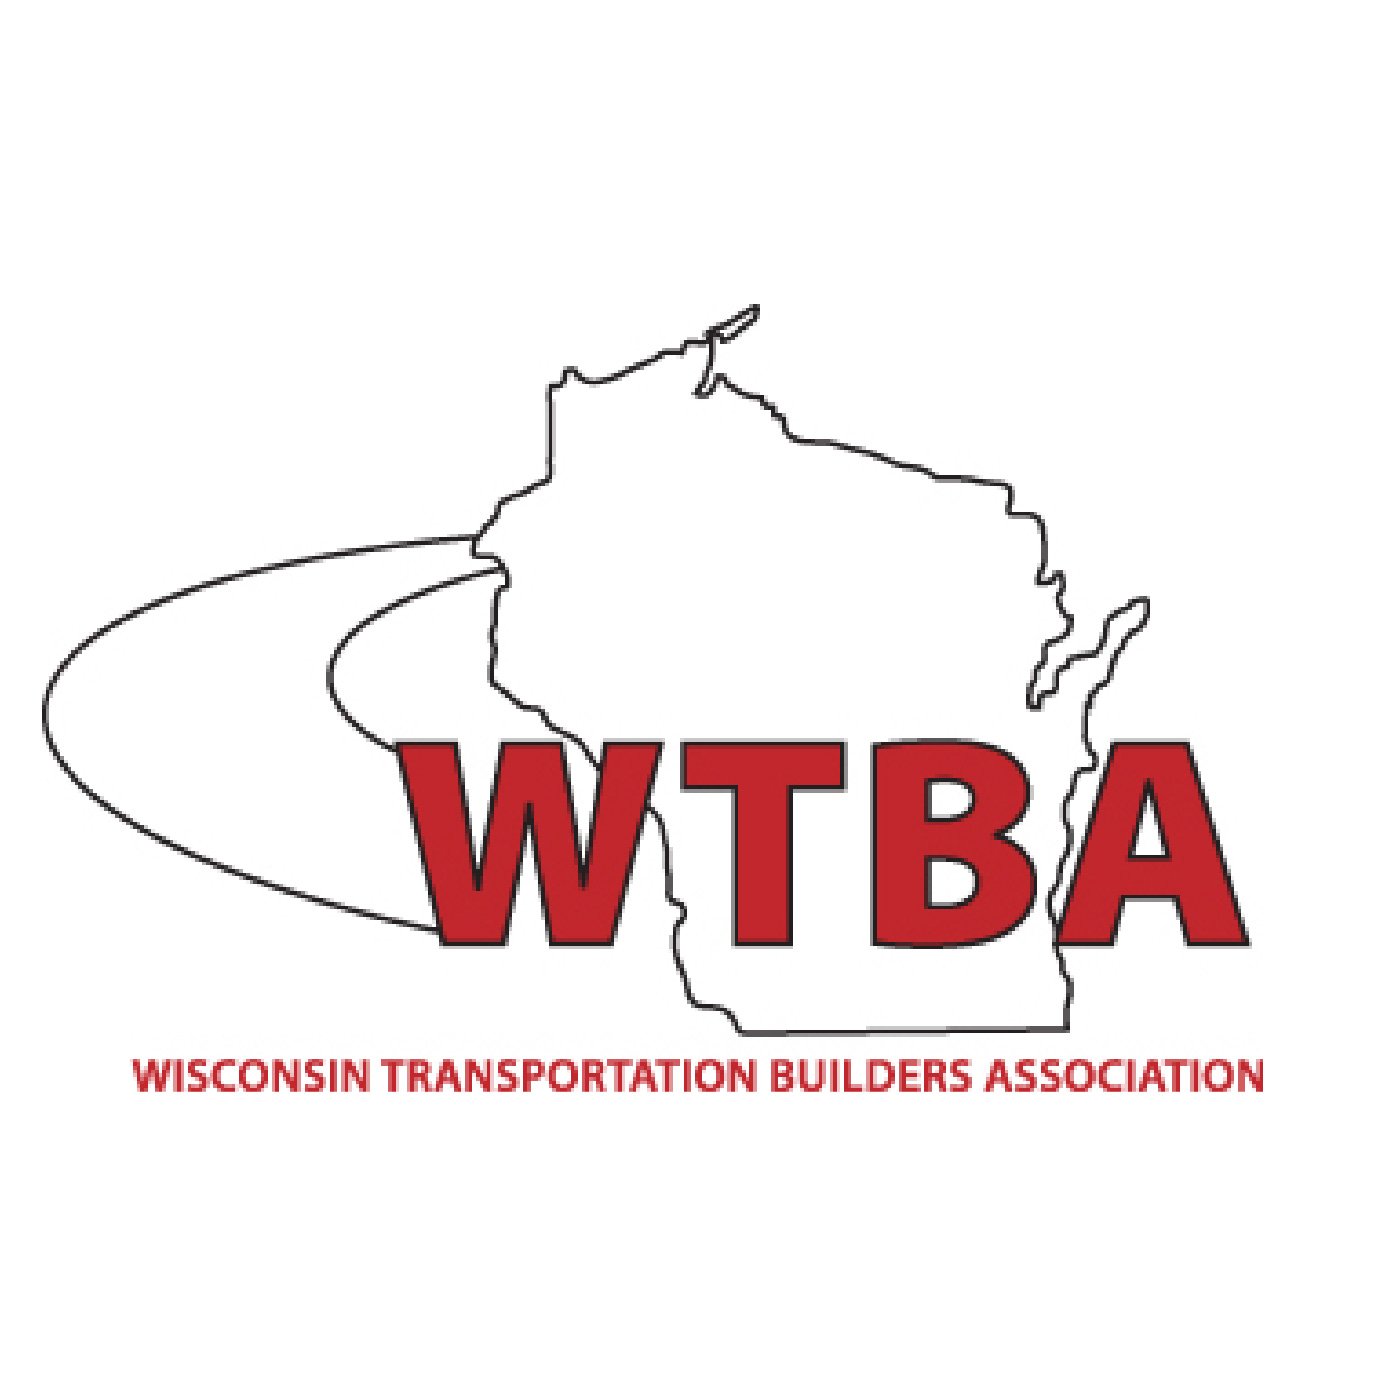 WTBA works to build a stronger WI economy by ensuring sustainable transportation funding, regulatory clarity, & projects that shape a safe transportation system